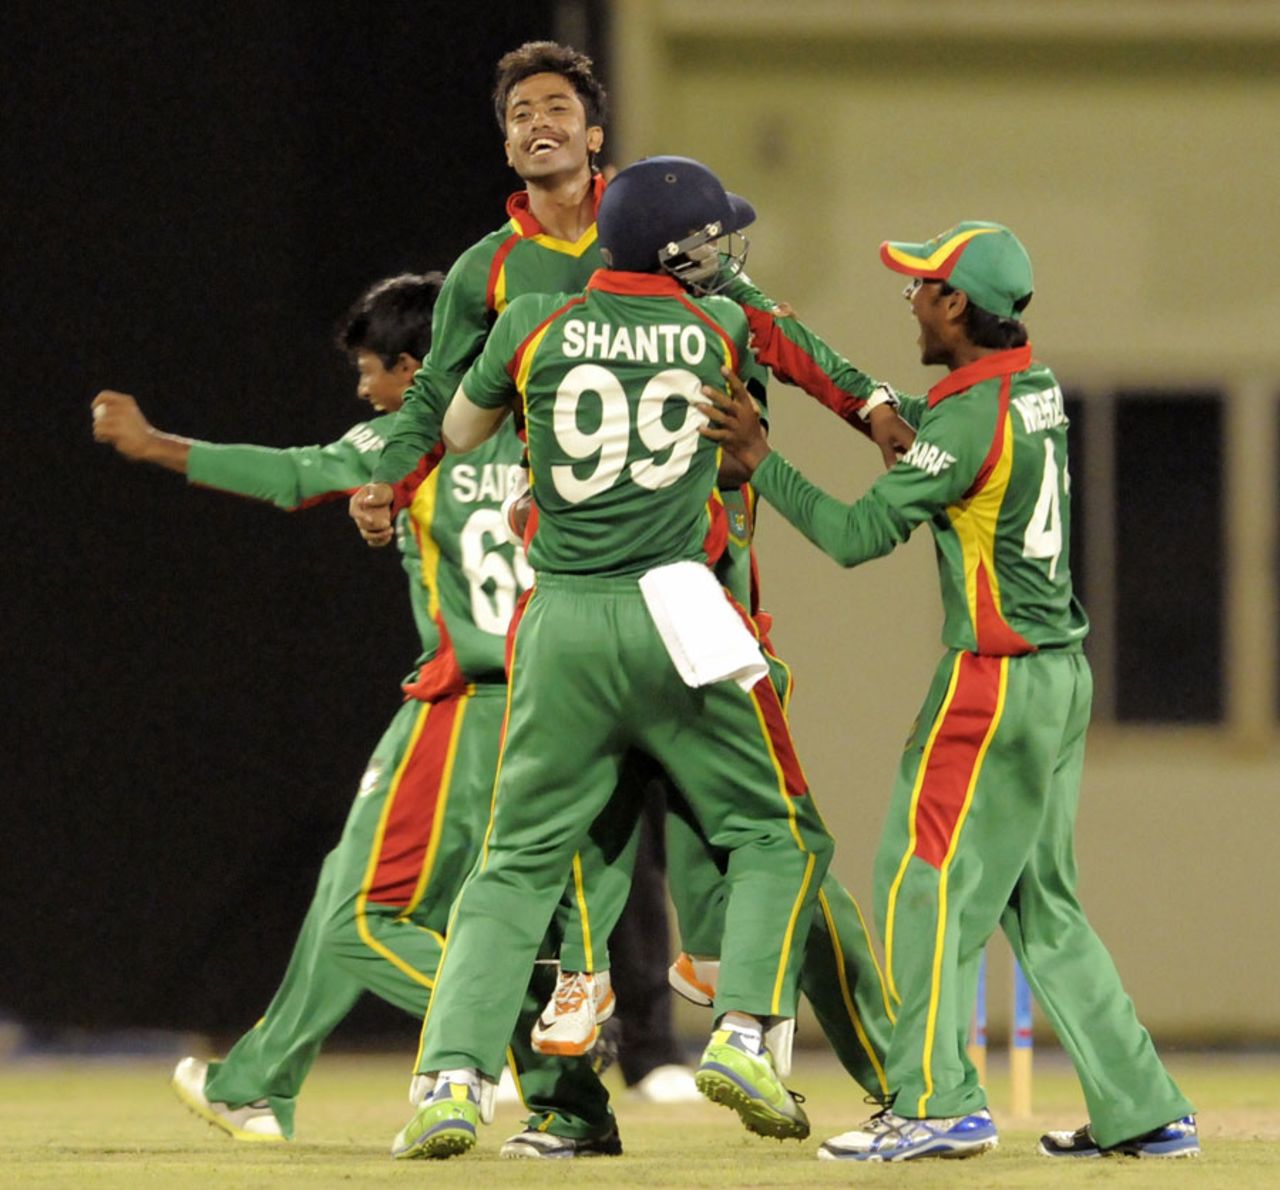 Jubair Hossain took a hat-trick to finish with figures of 3 for 7, West Indies U-19 v Bangladesh U-19, 3rd Youth ODI, Providence, October 11, 2013